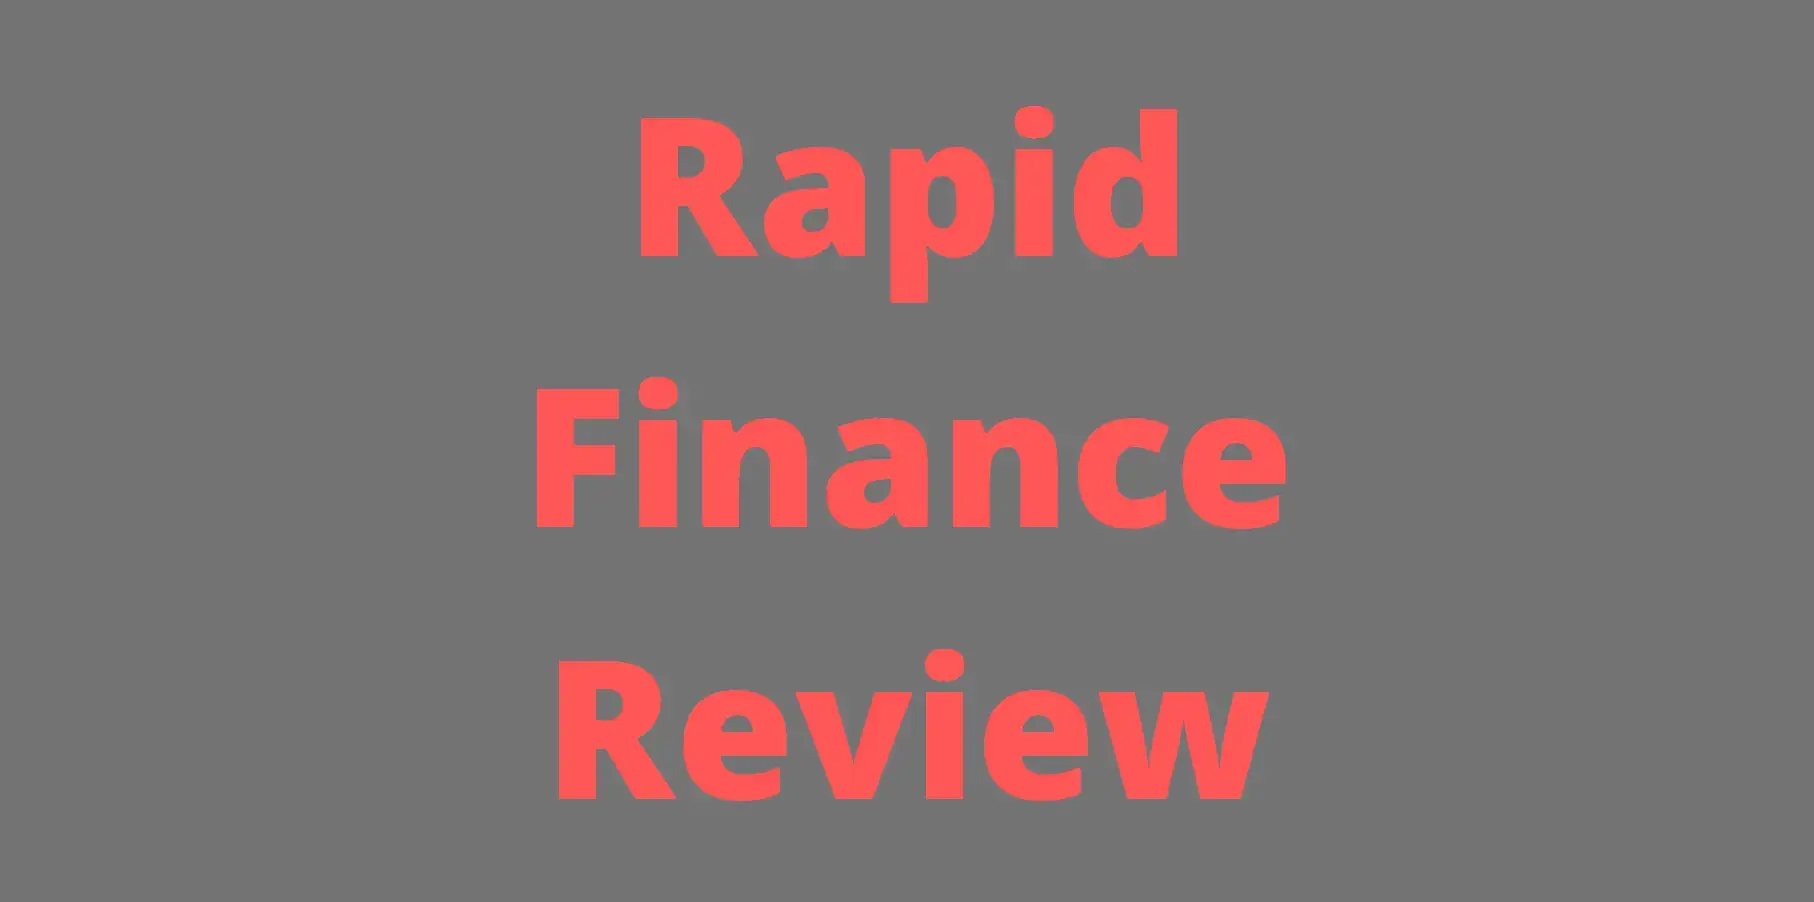 Rapid Finance Review